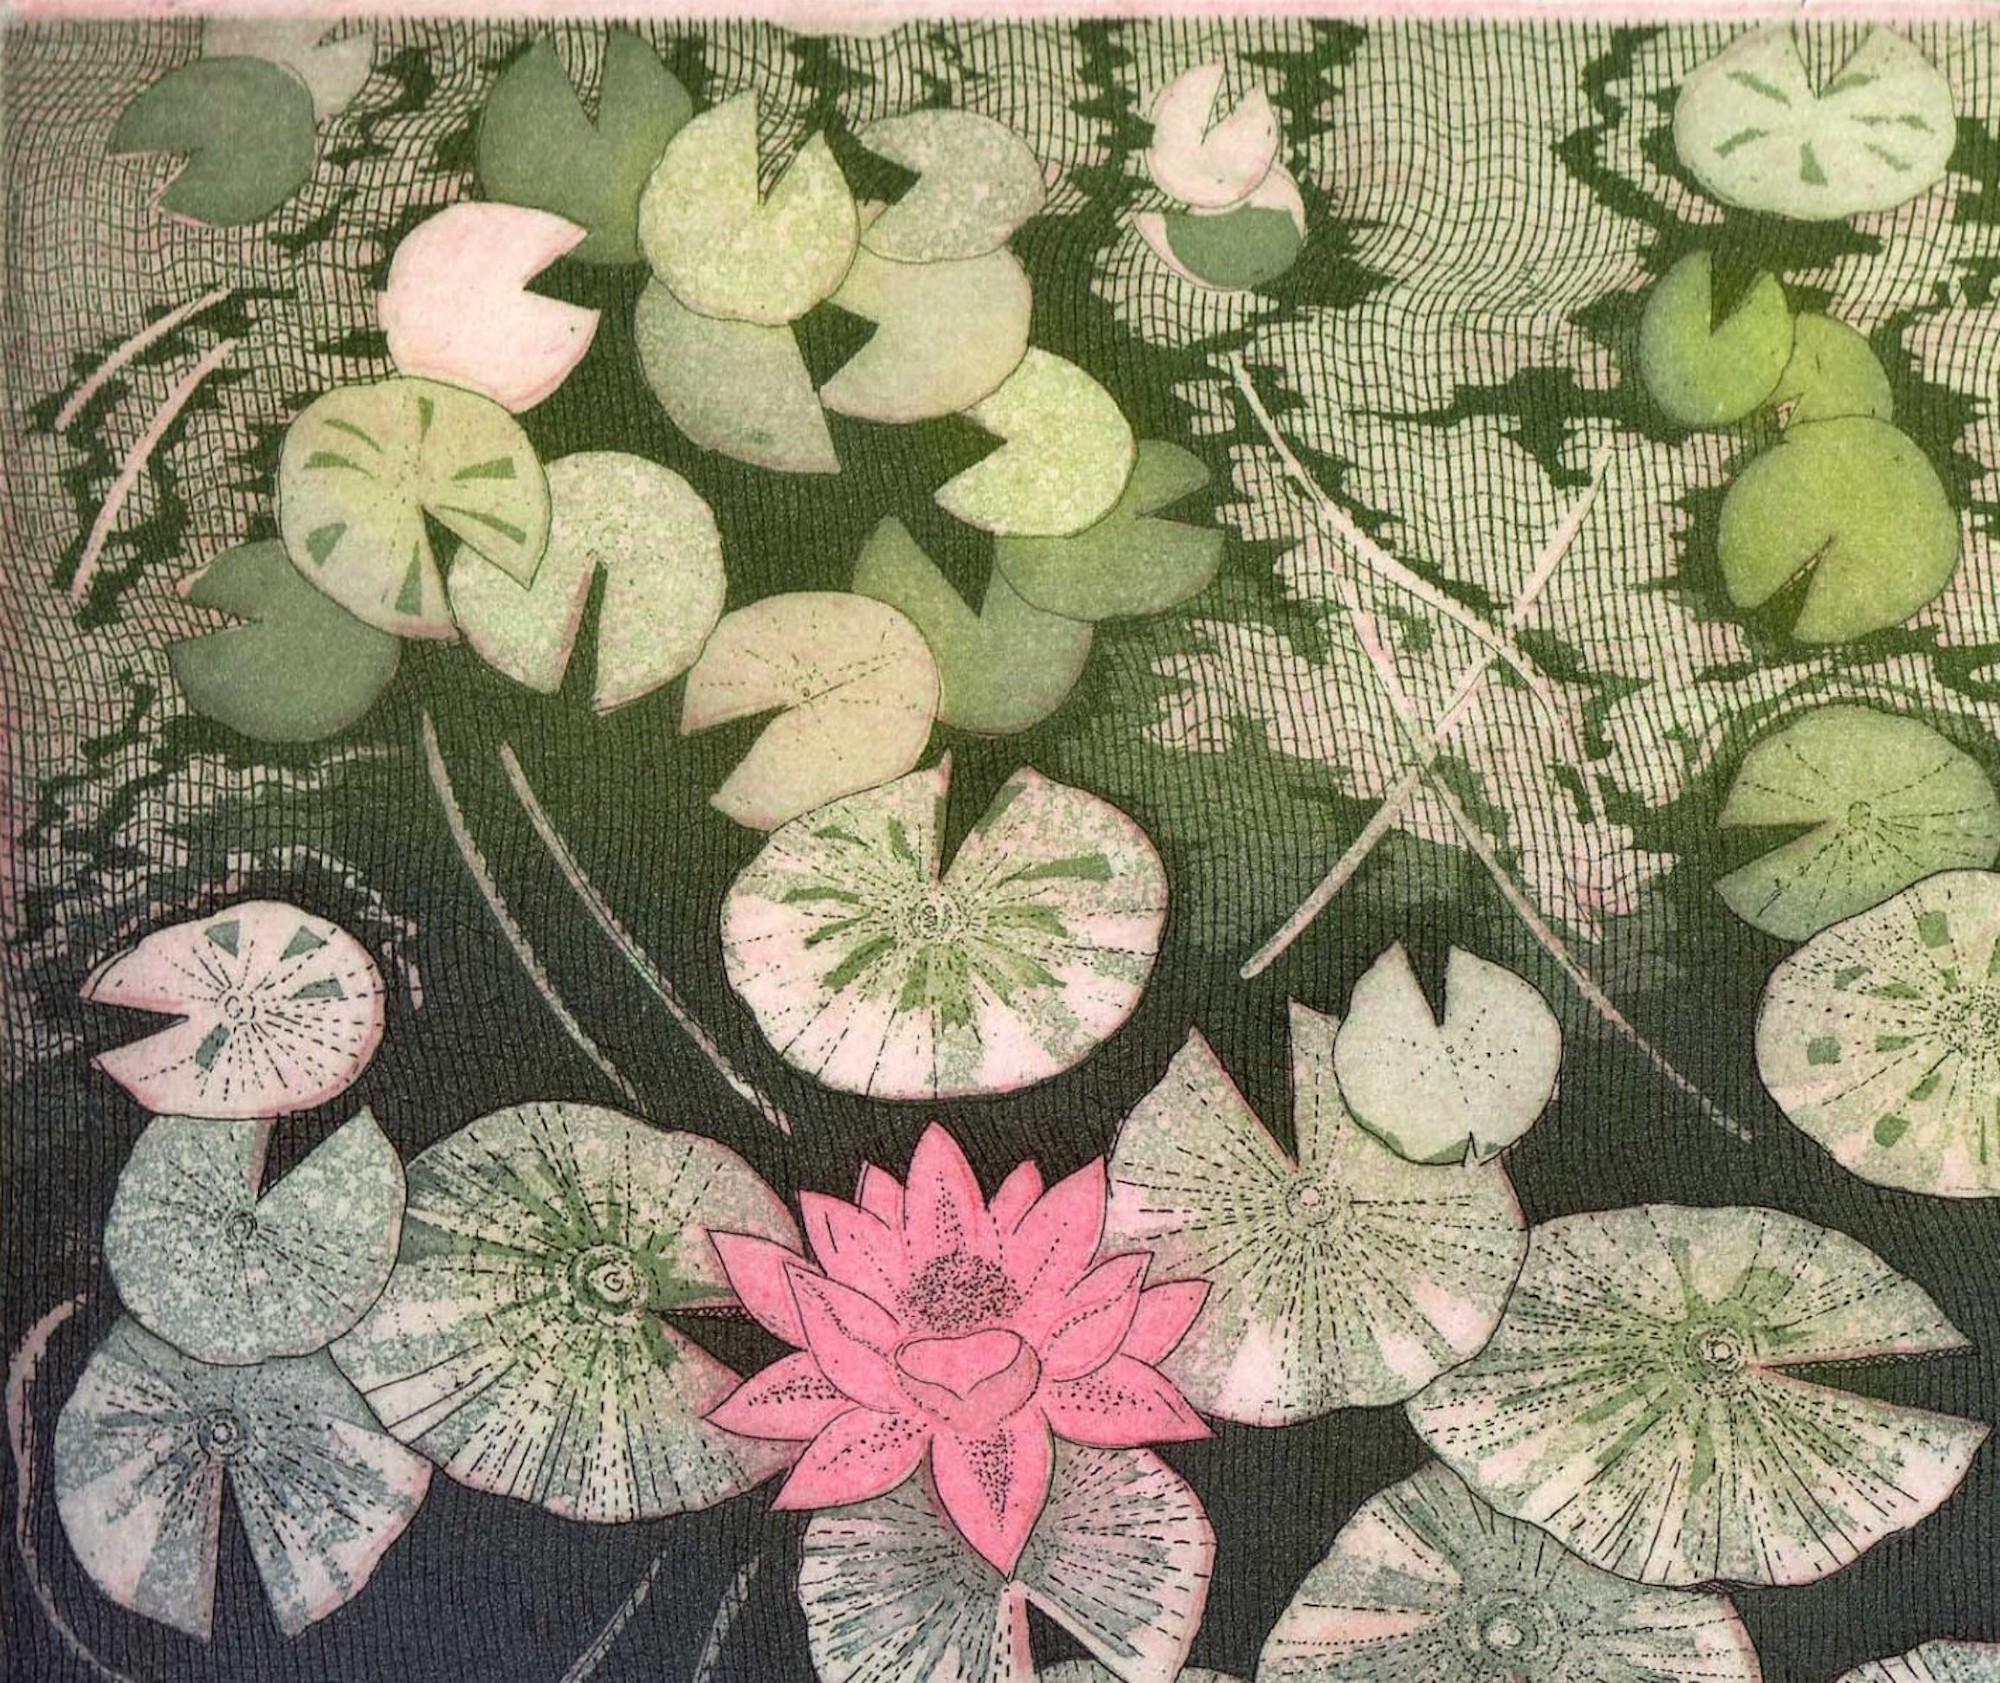 Waterlily pool by Elaine Marshall [2012]
Signed by the artist
Etching and aquatint
Edition of 5
Image size: H:17 cm x W:20 cm
Complete Size of Unframed Work: H:28 cm x W:36 cm x D:1cm
Please note that insitu images are purely an indication of how a